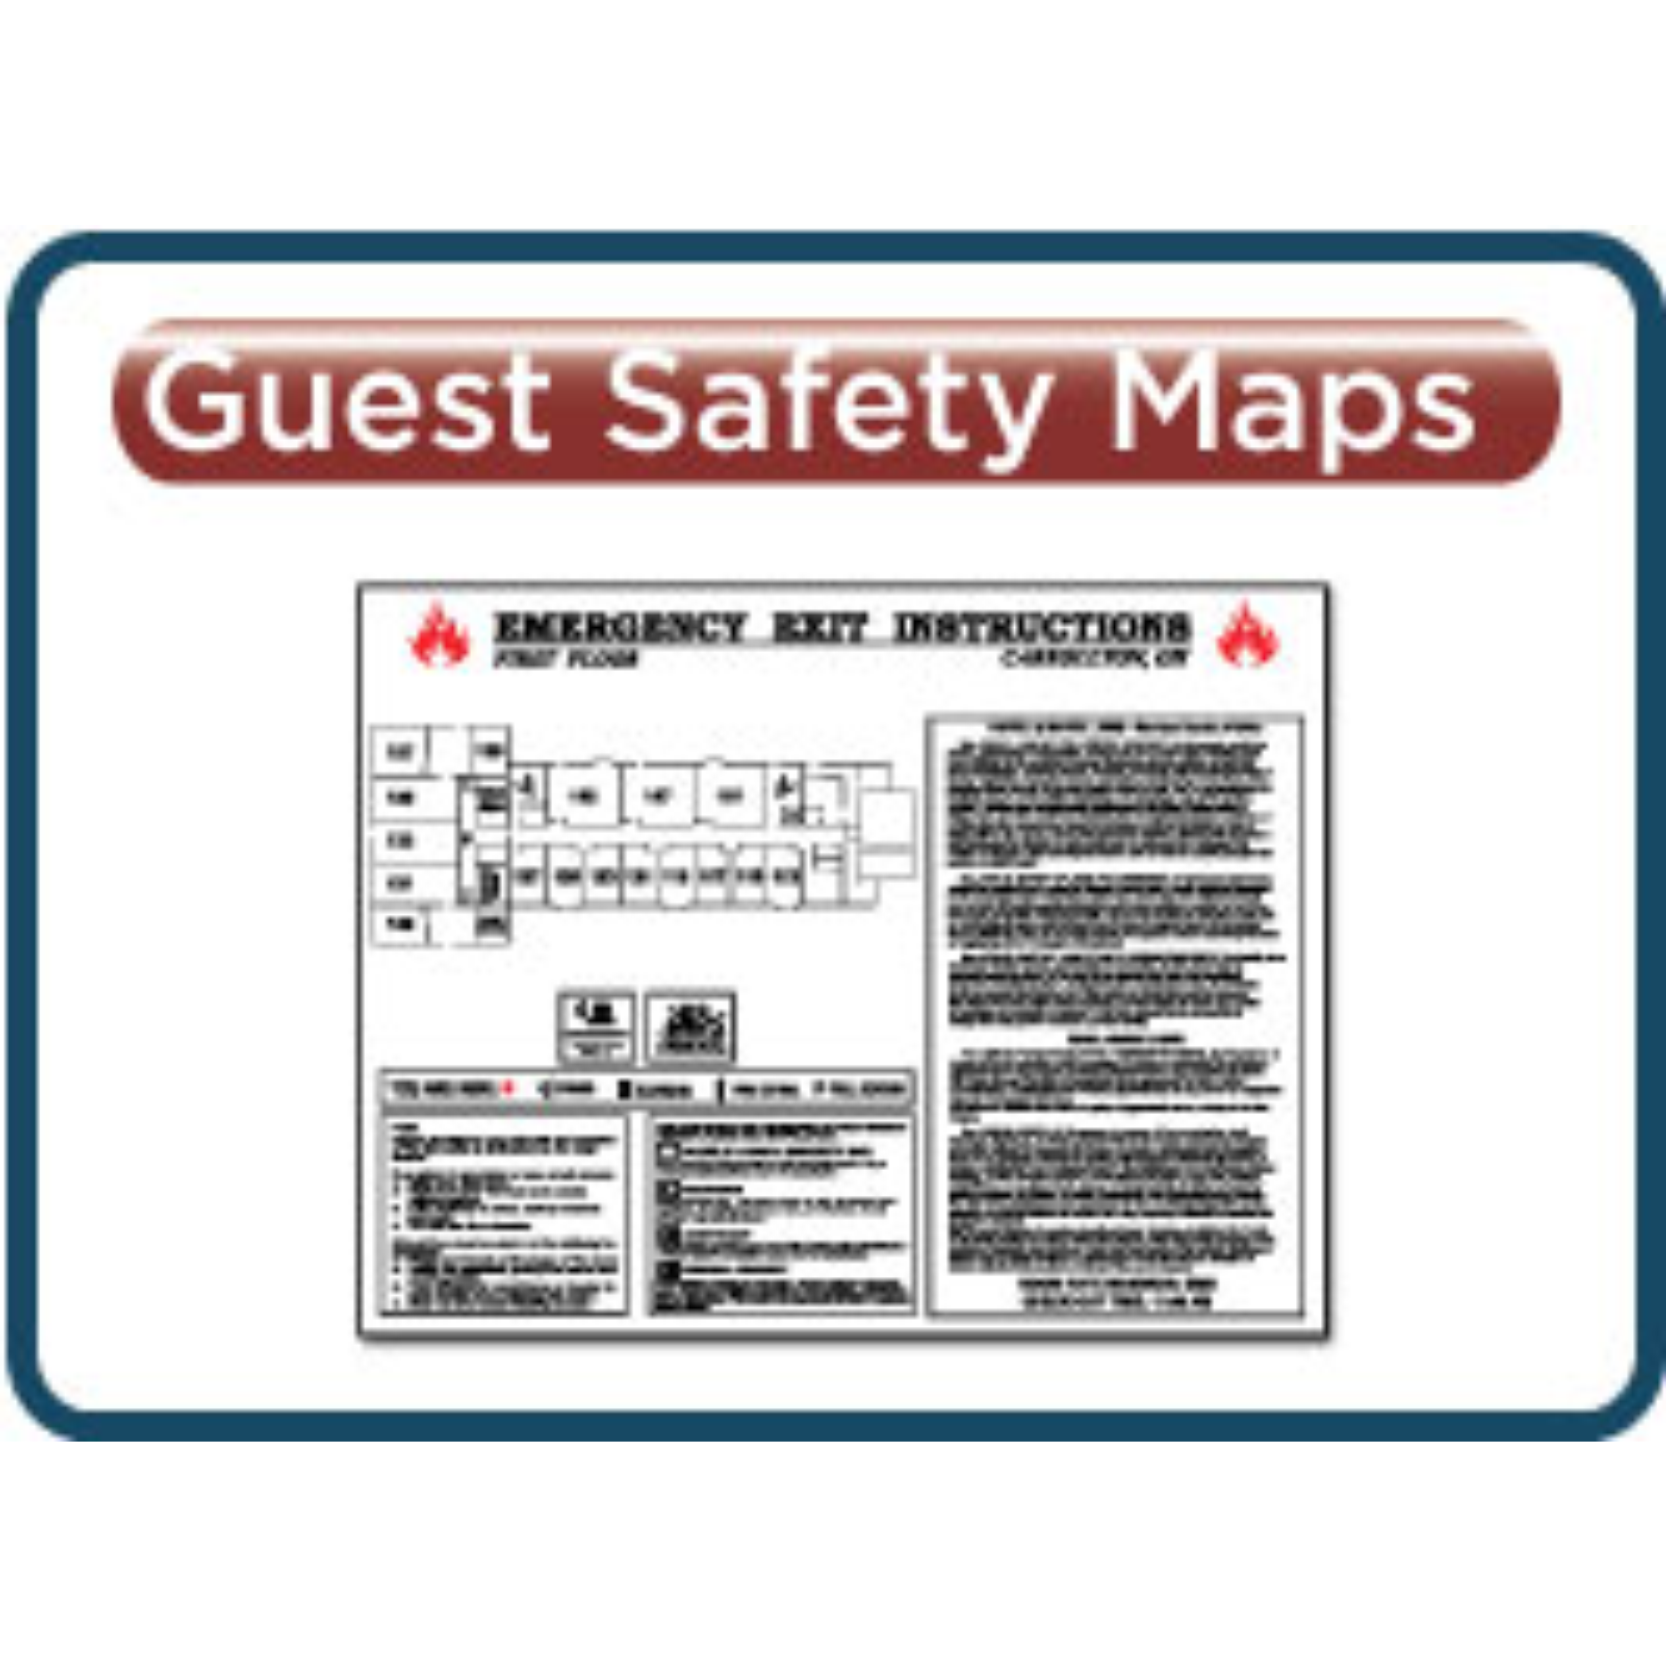 AmericInn - Guest Safety Signs